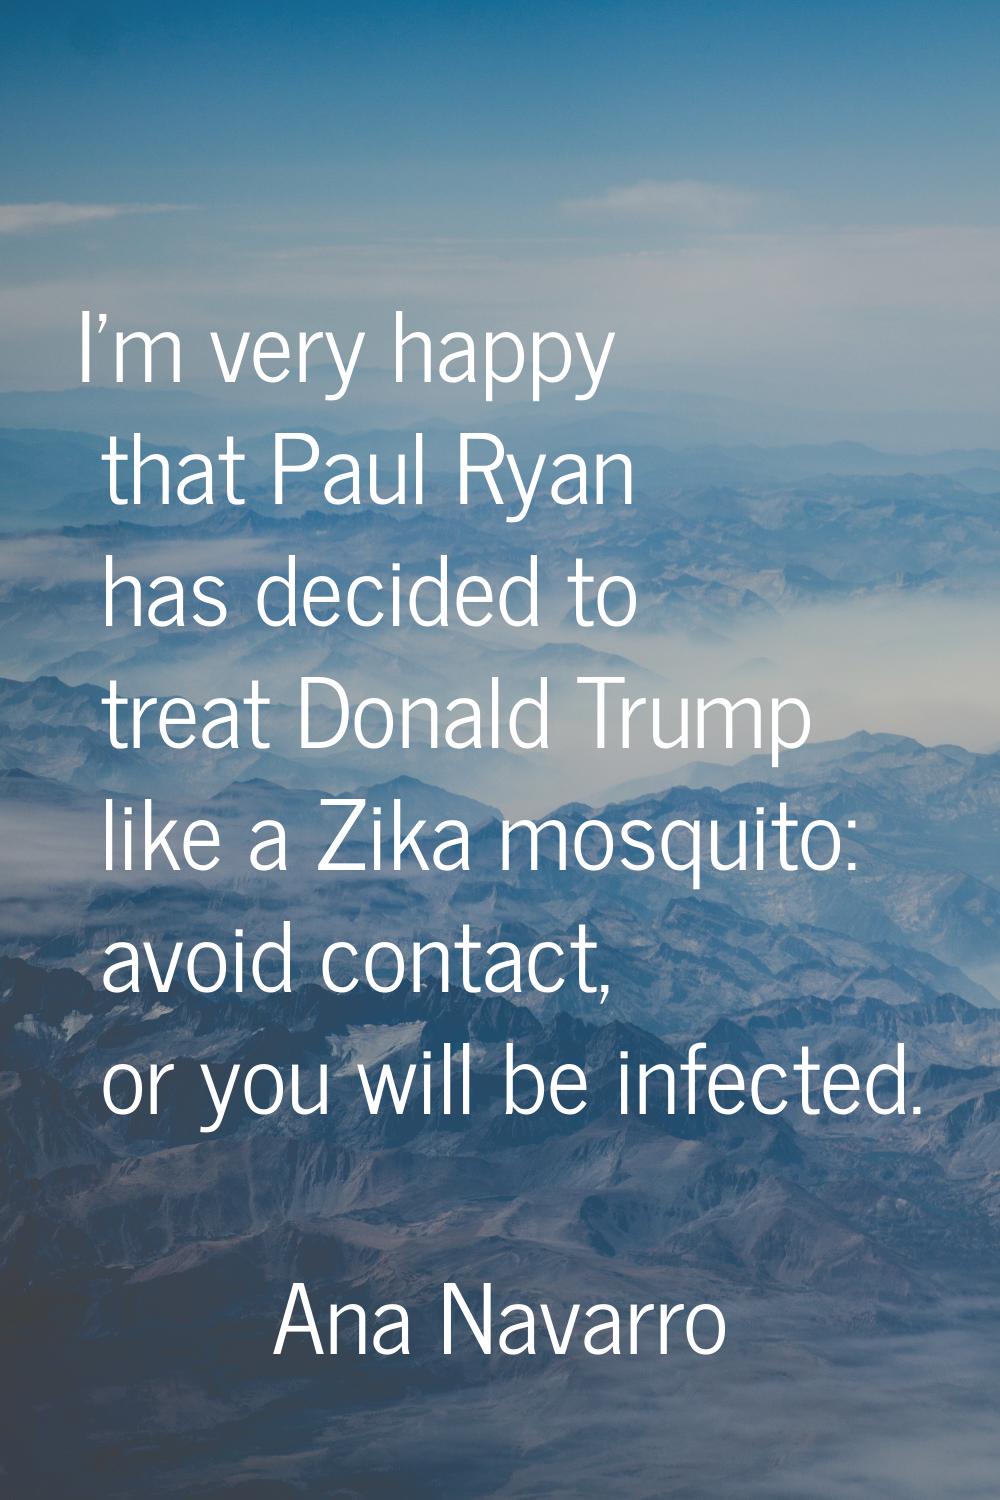 I'm very happy that Paul Ryan has decided to treat Donald Trump like a Zika mosquito: avoid contact